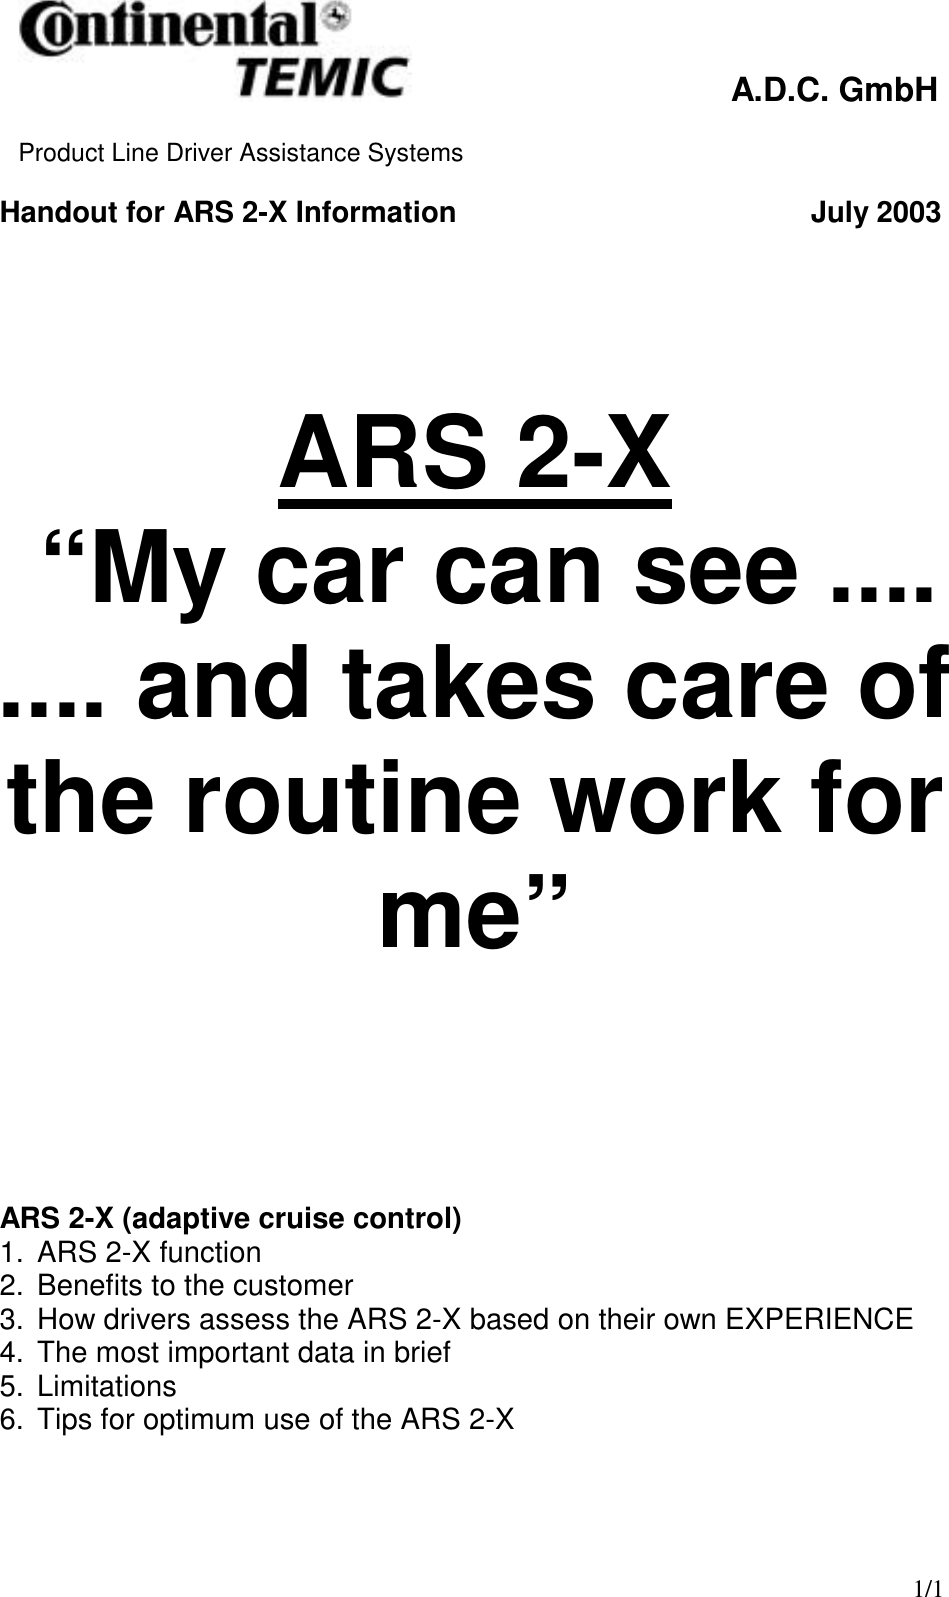  A.D.C. GmbH  Product Line Driver Assistance Systems    1/1 Handout for ARS 2-X Information          July 2003                               ARS 2-X (adaptive cruise control)  1.  ARS 2-X function 2.  Benefits to the customer 3.  How drivers assess the ARS 2-X based on their own EXPERIENCE 4.  The most important data in brief 5. Limitations 6.  Tips for optimum use of the ARS 2-X  ARS 2-X  “My car can see .... .... and takes care of the routine work for me” 